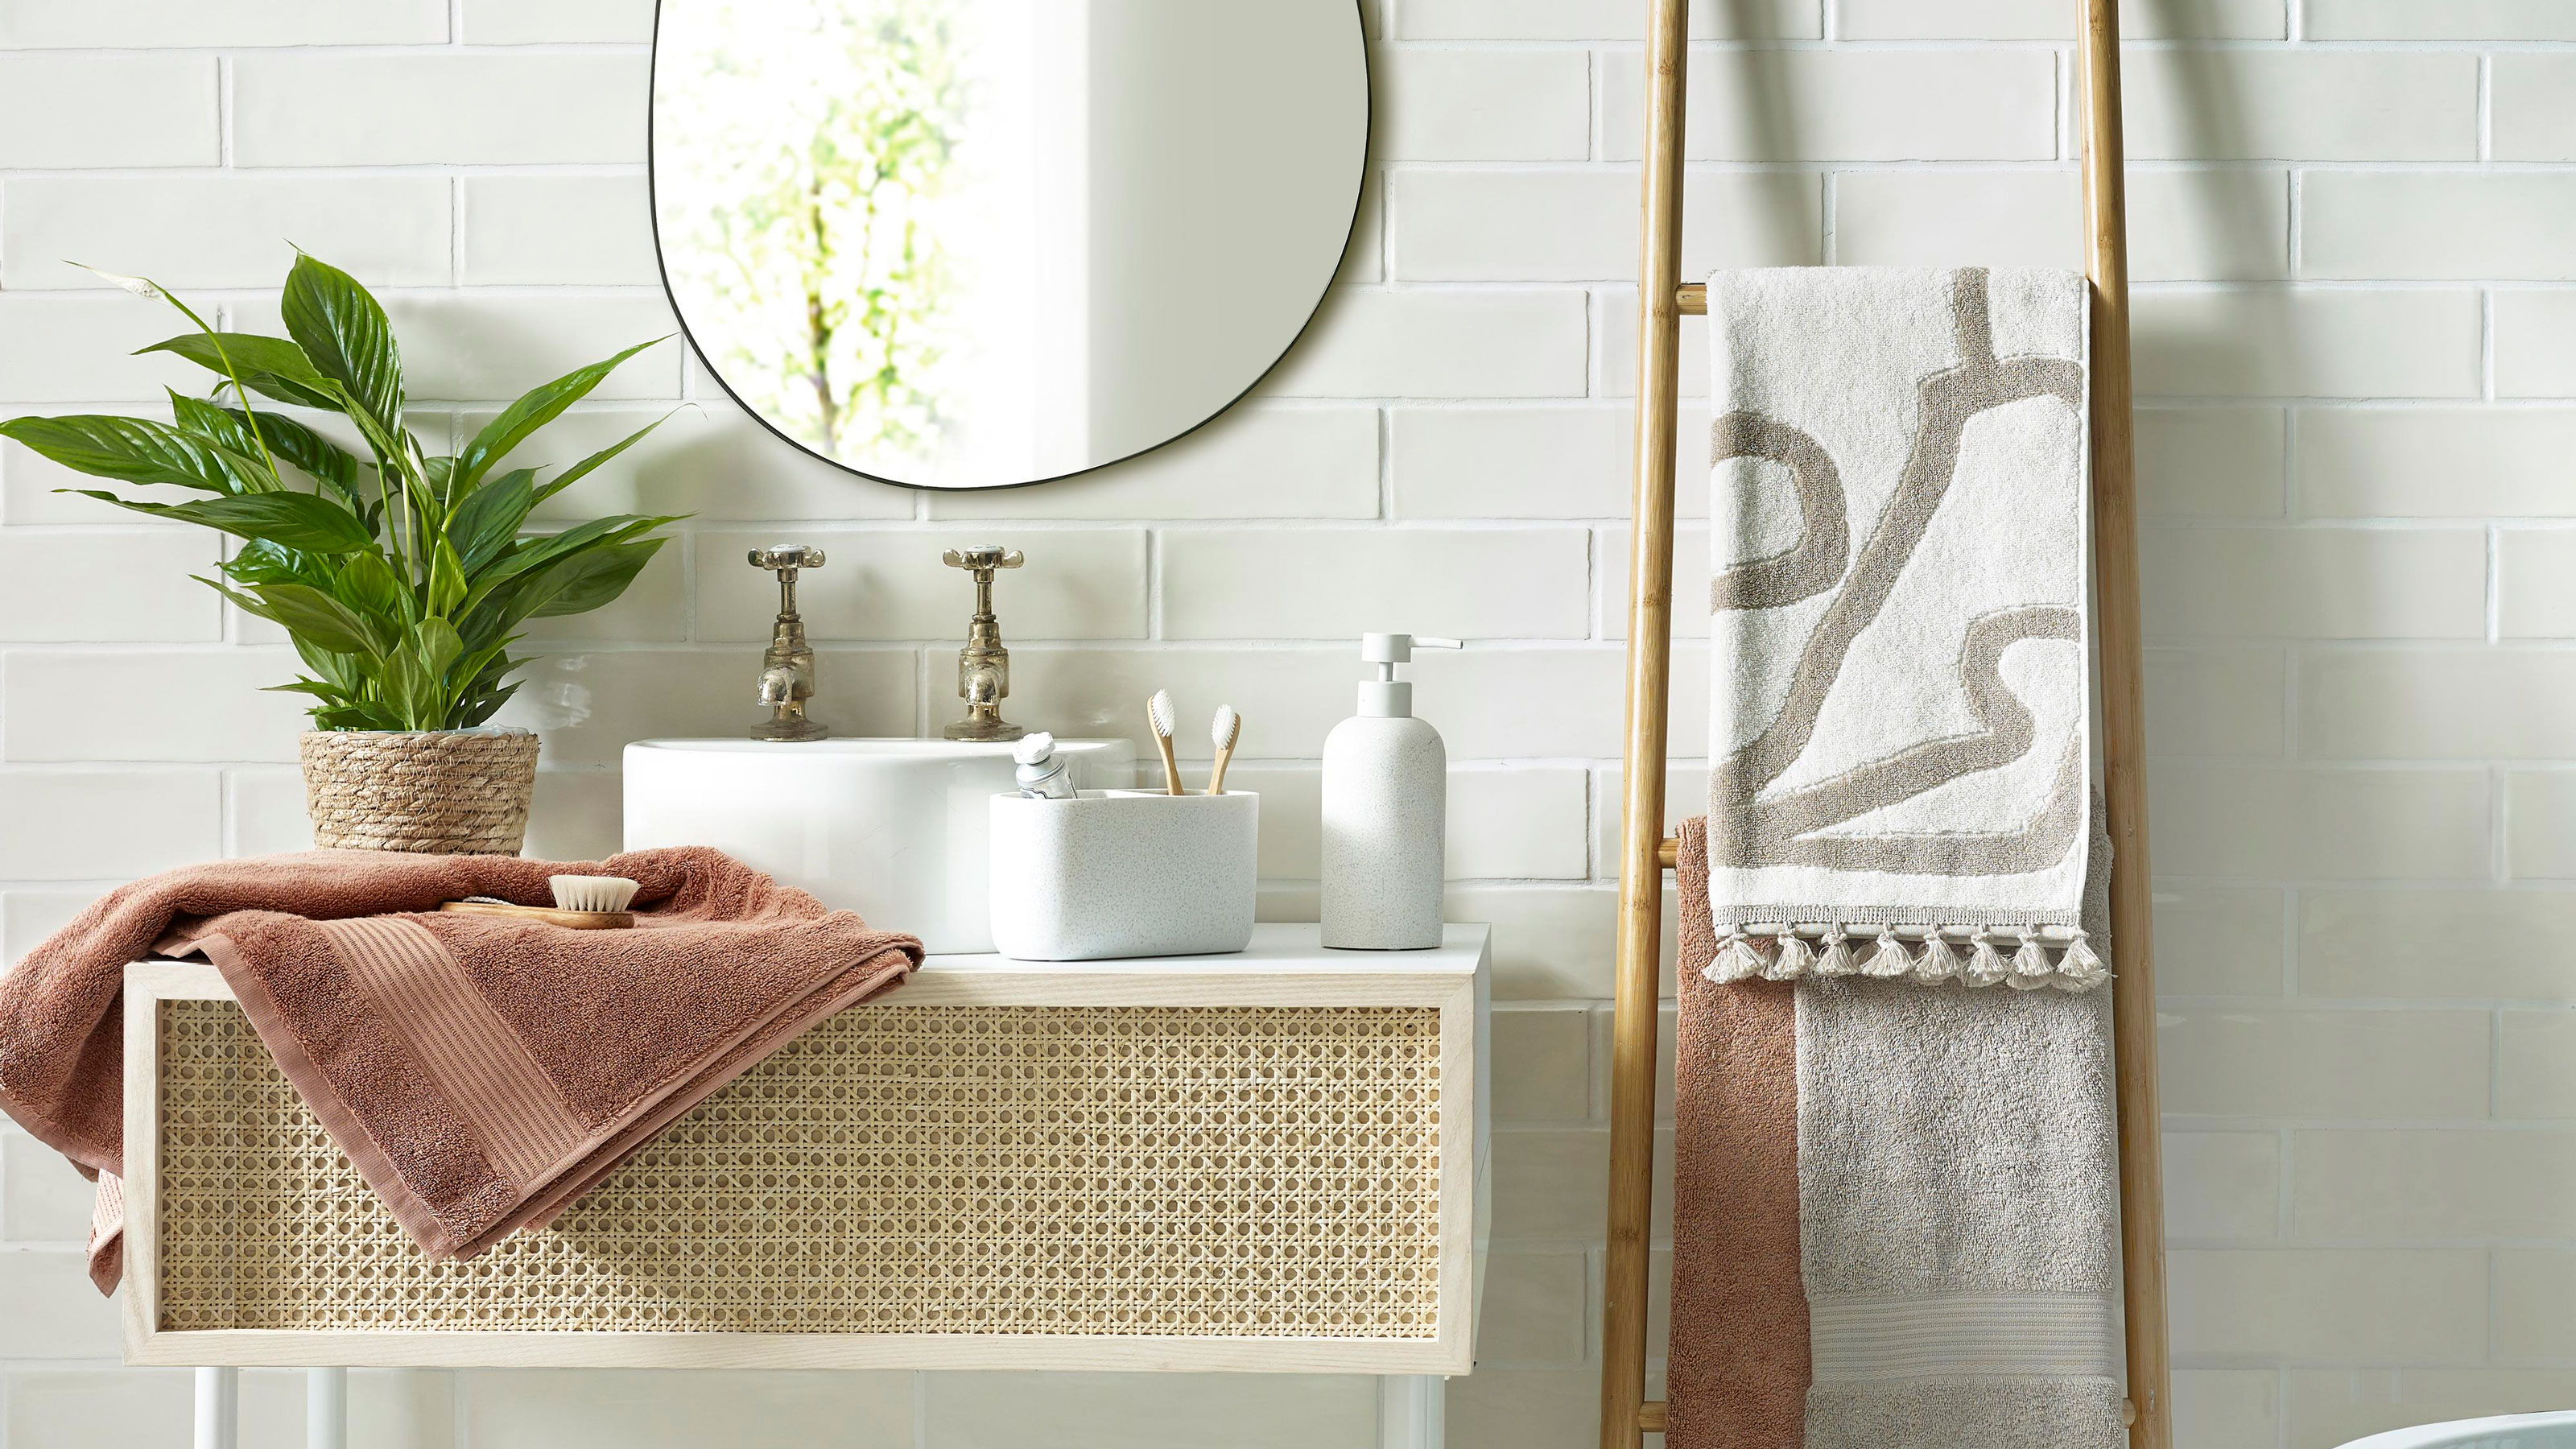 Marble bathroom ideas – 10 stunning ways to use this luxe material